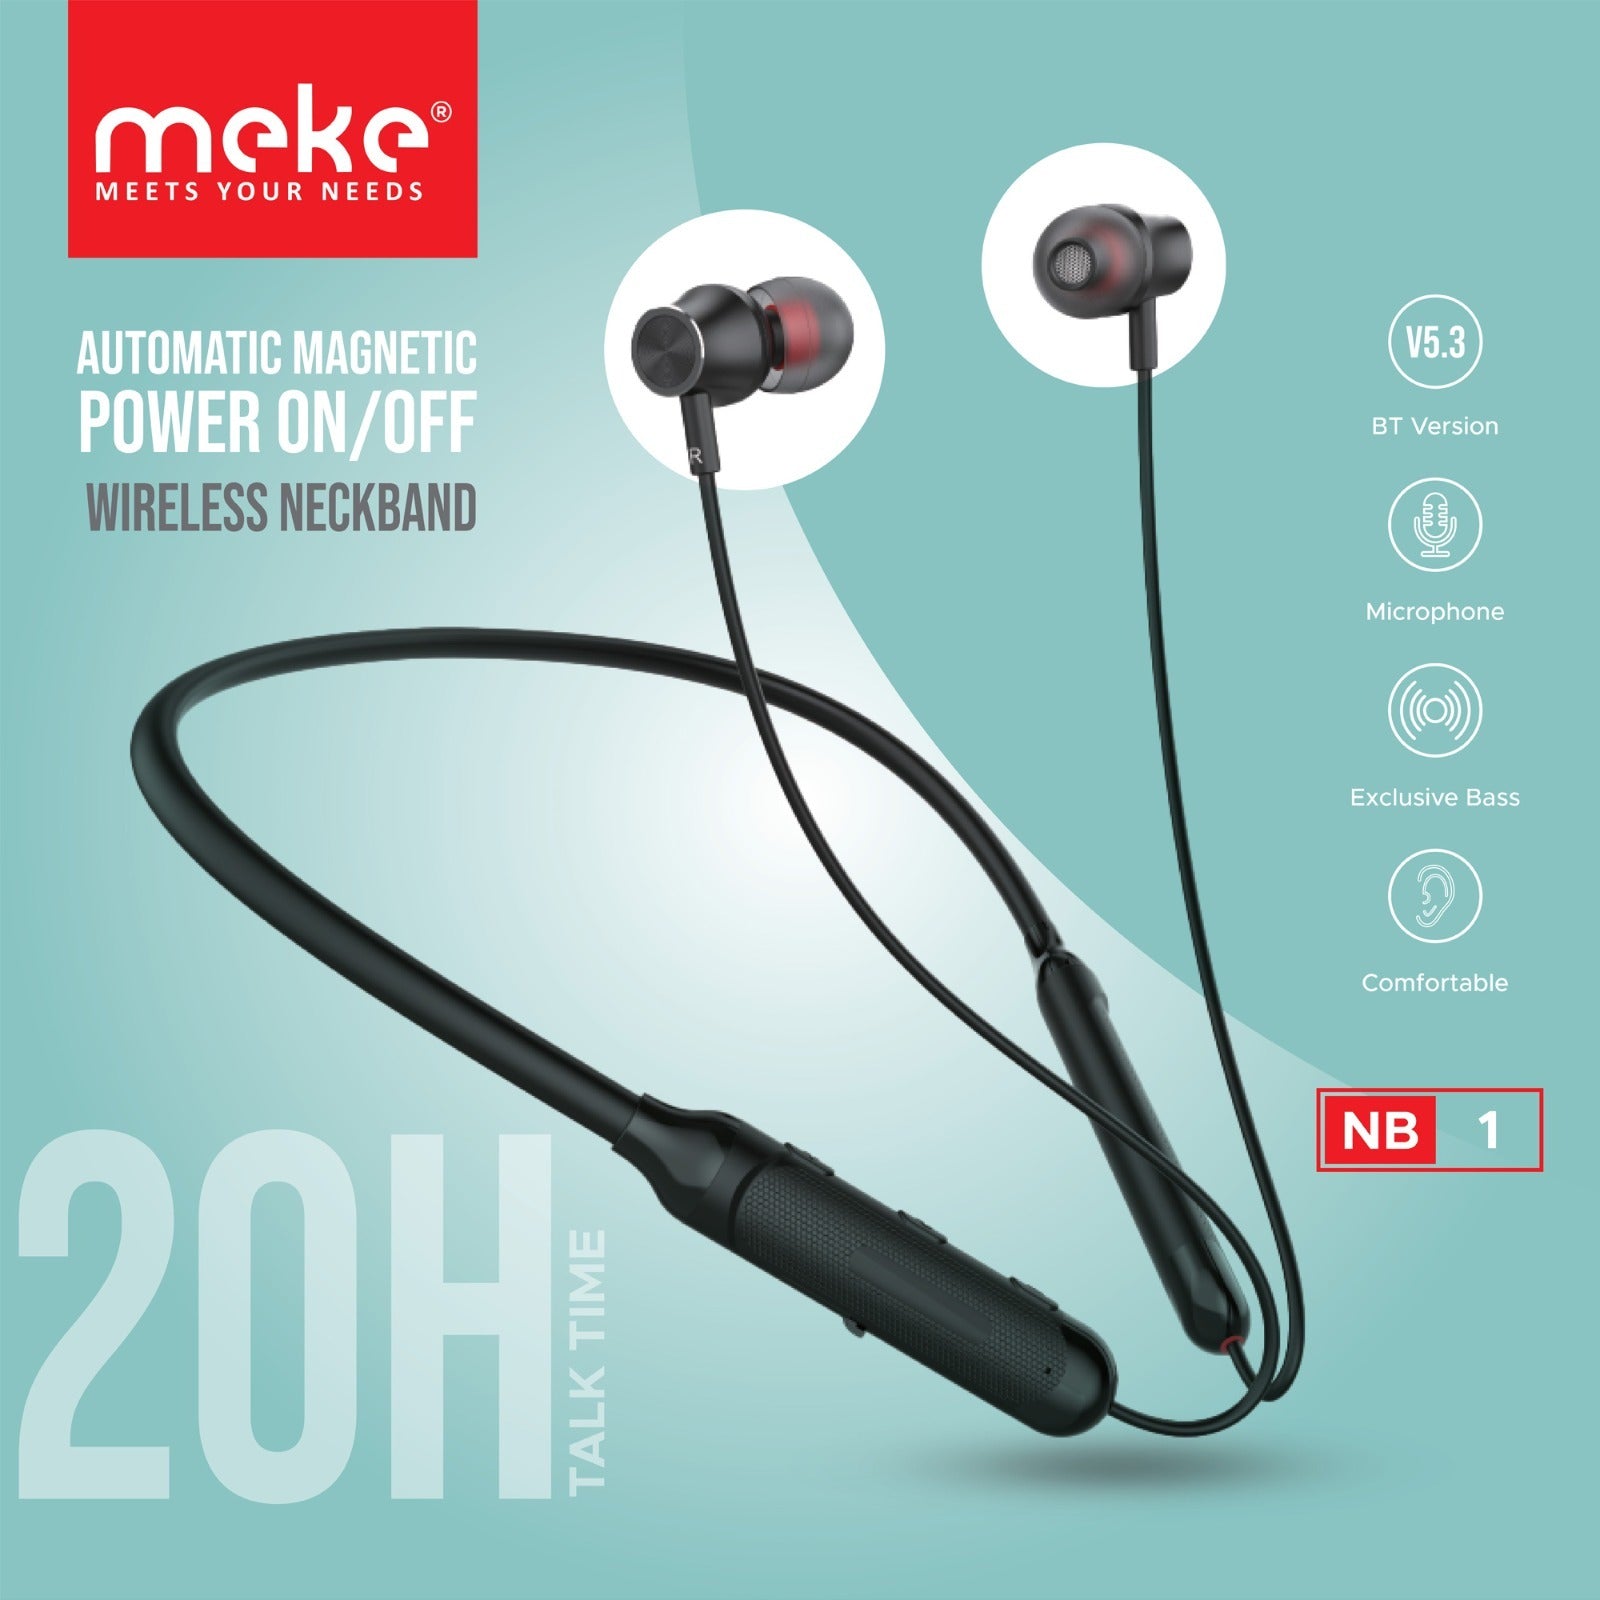 Meke NB-1 Neckband Headset with Magnetic Attraction GT2023